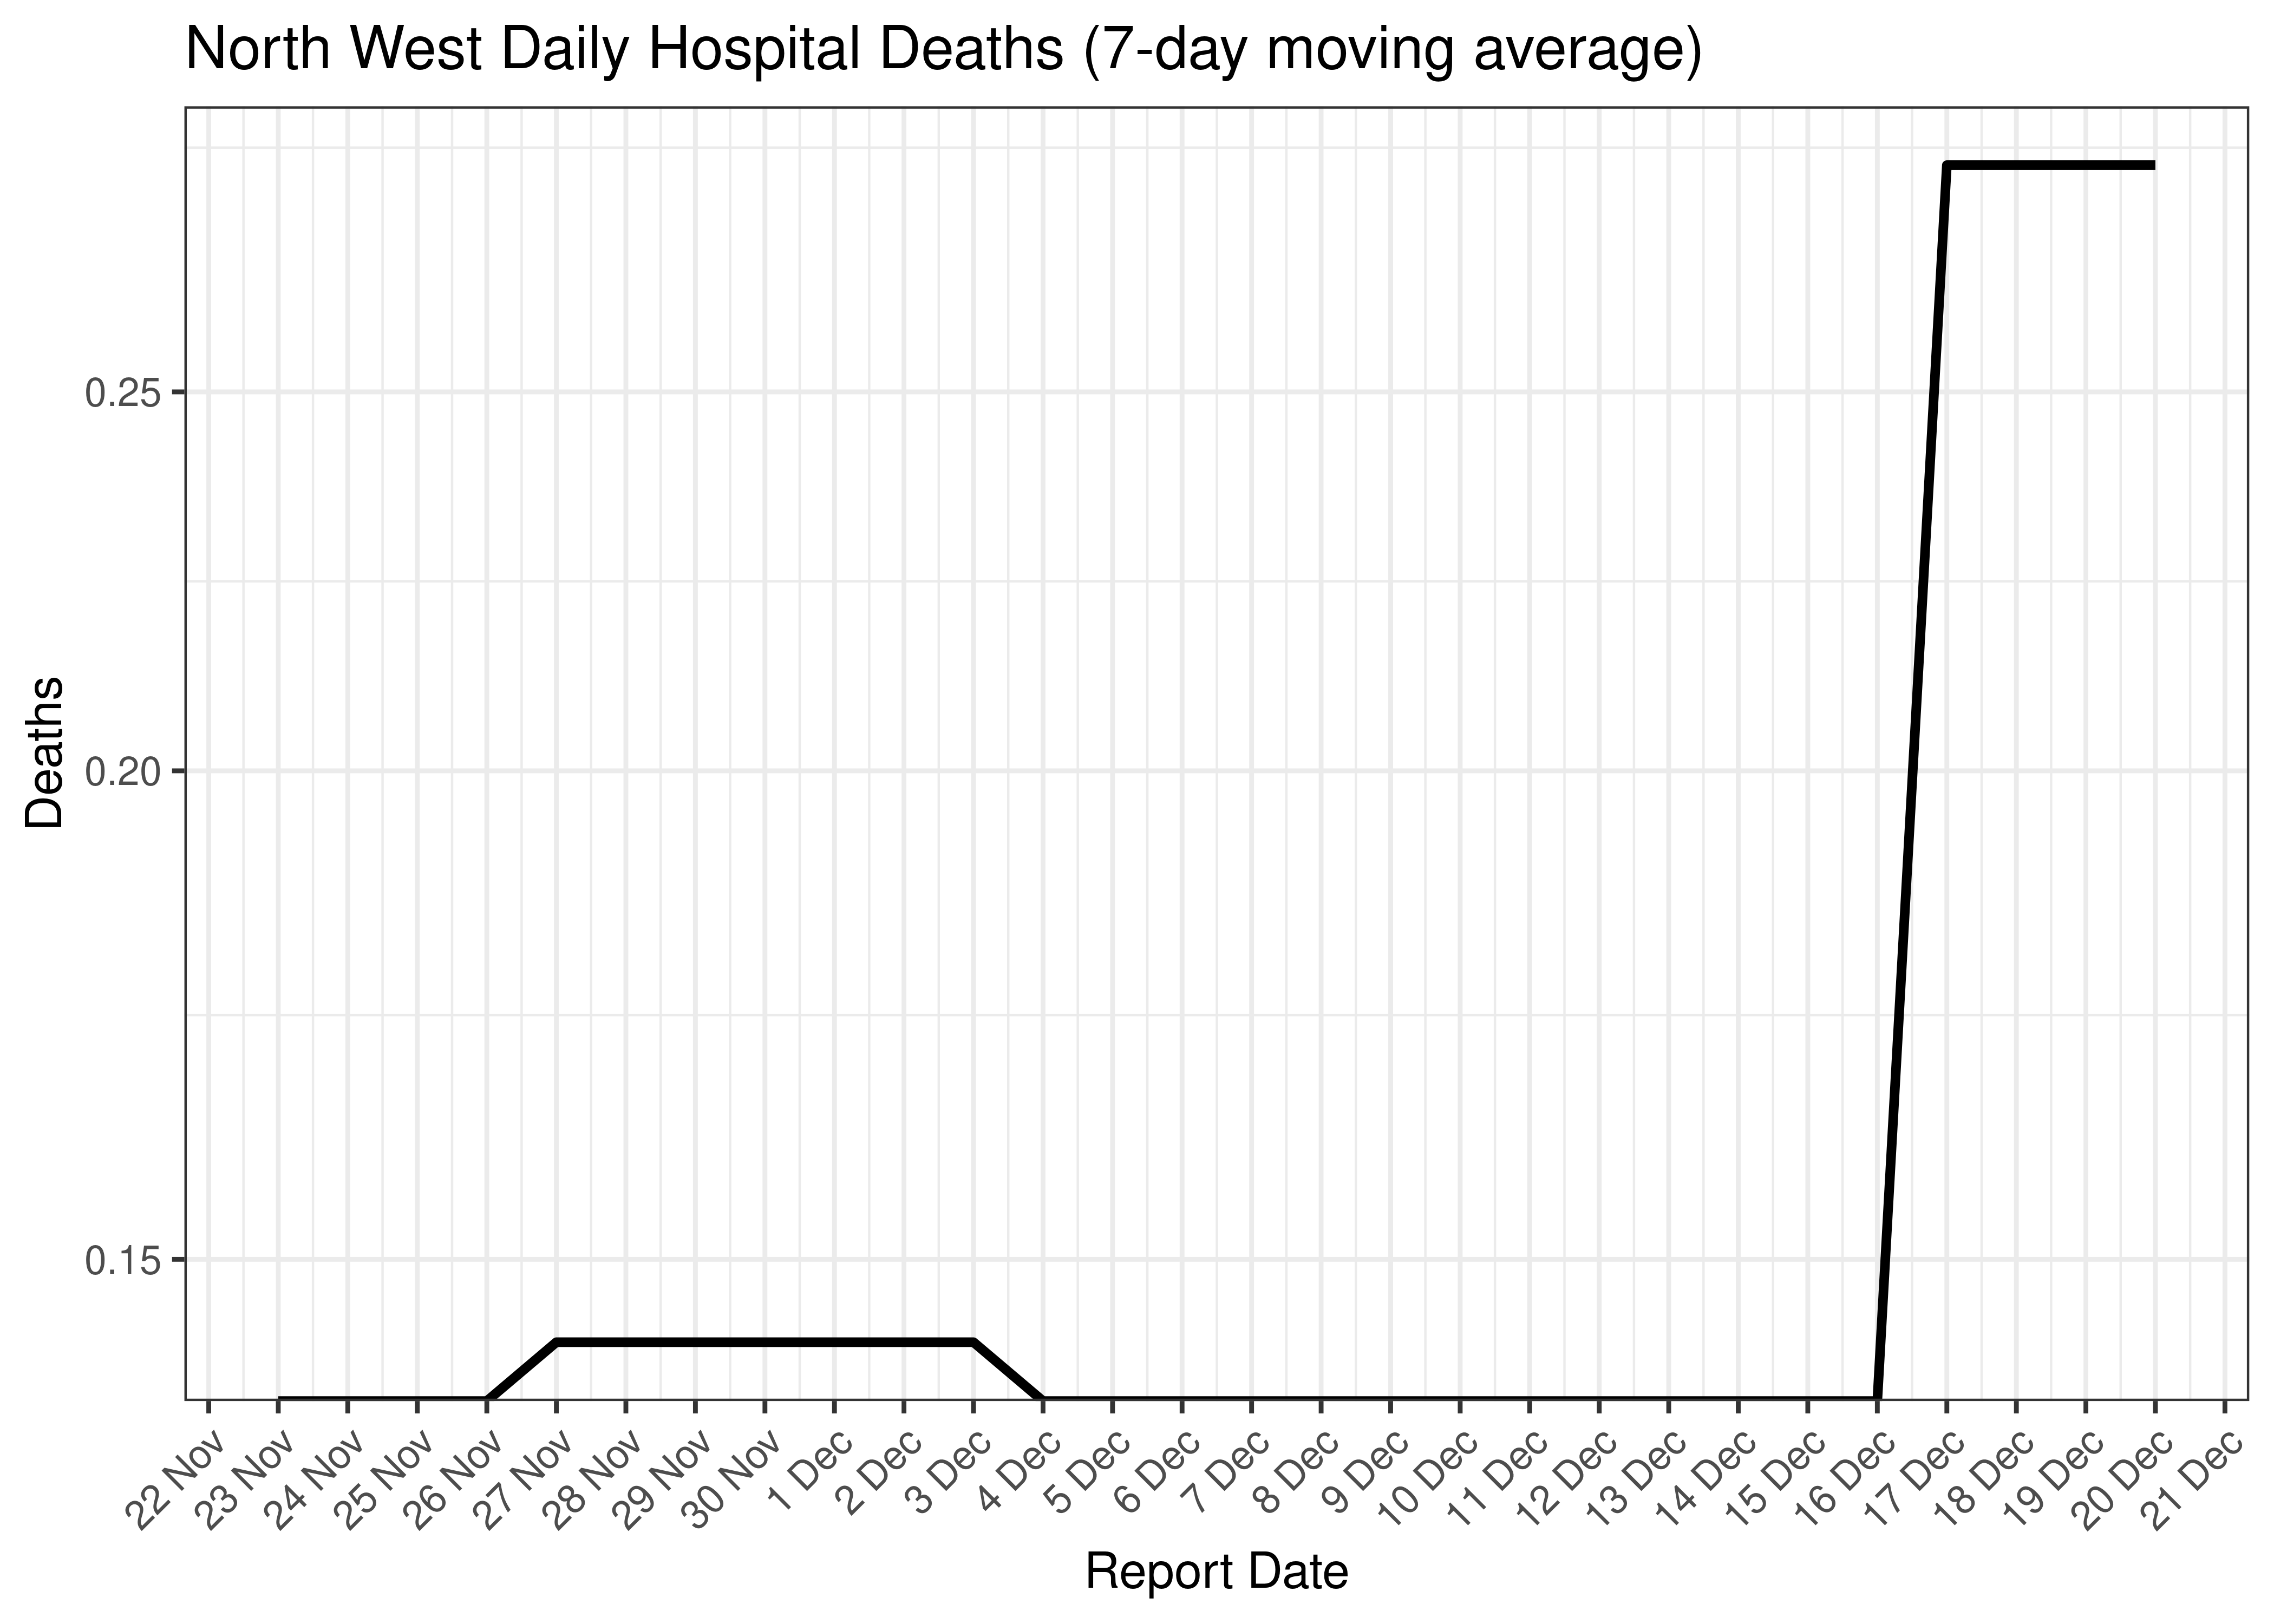 North West Daily Hospital Deaths for Last 30-days (7-day moving average)